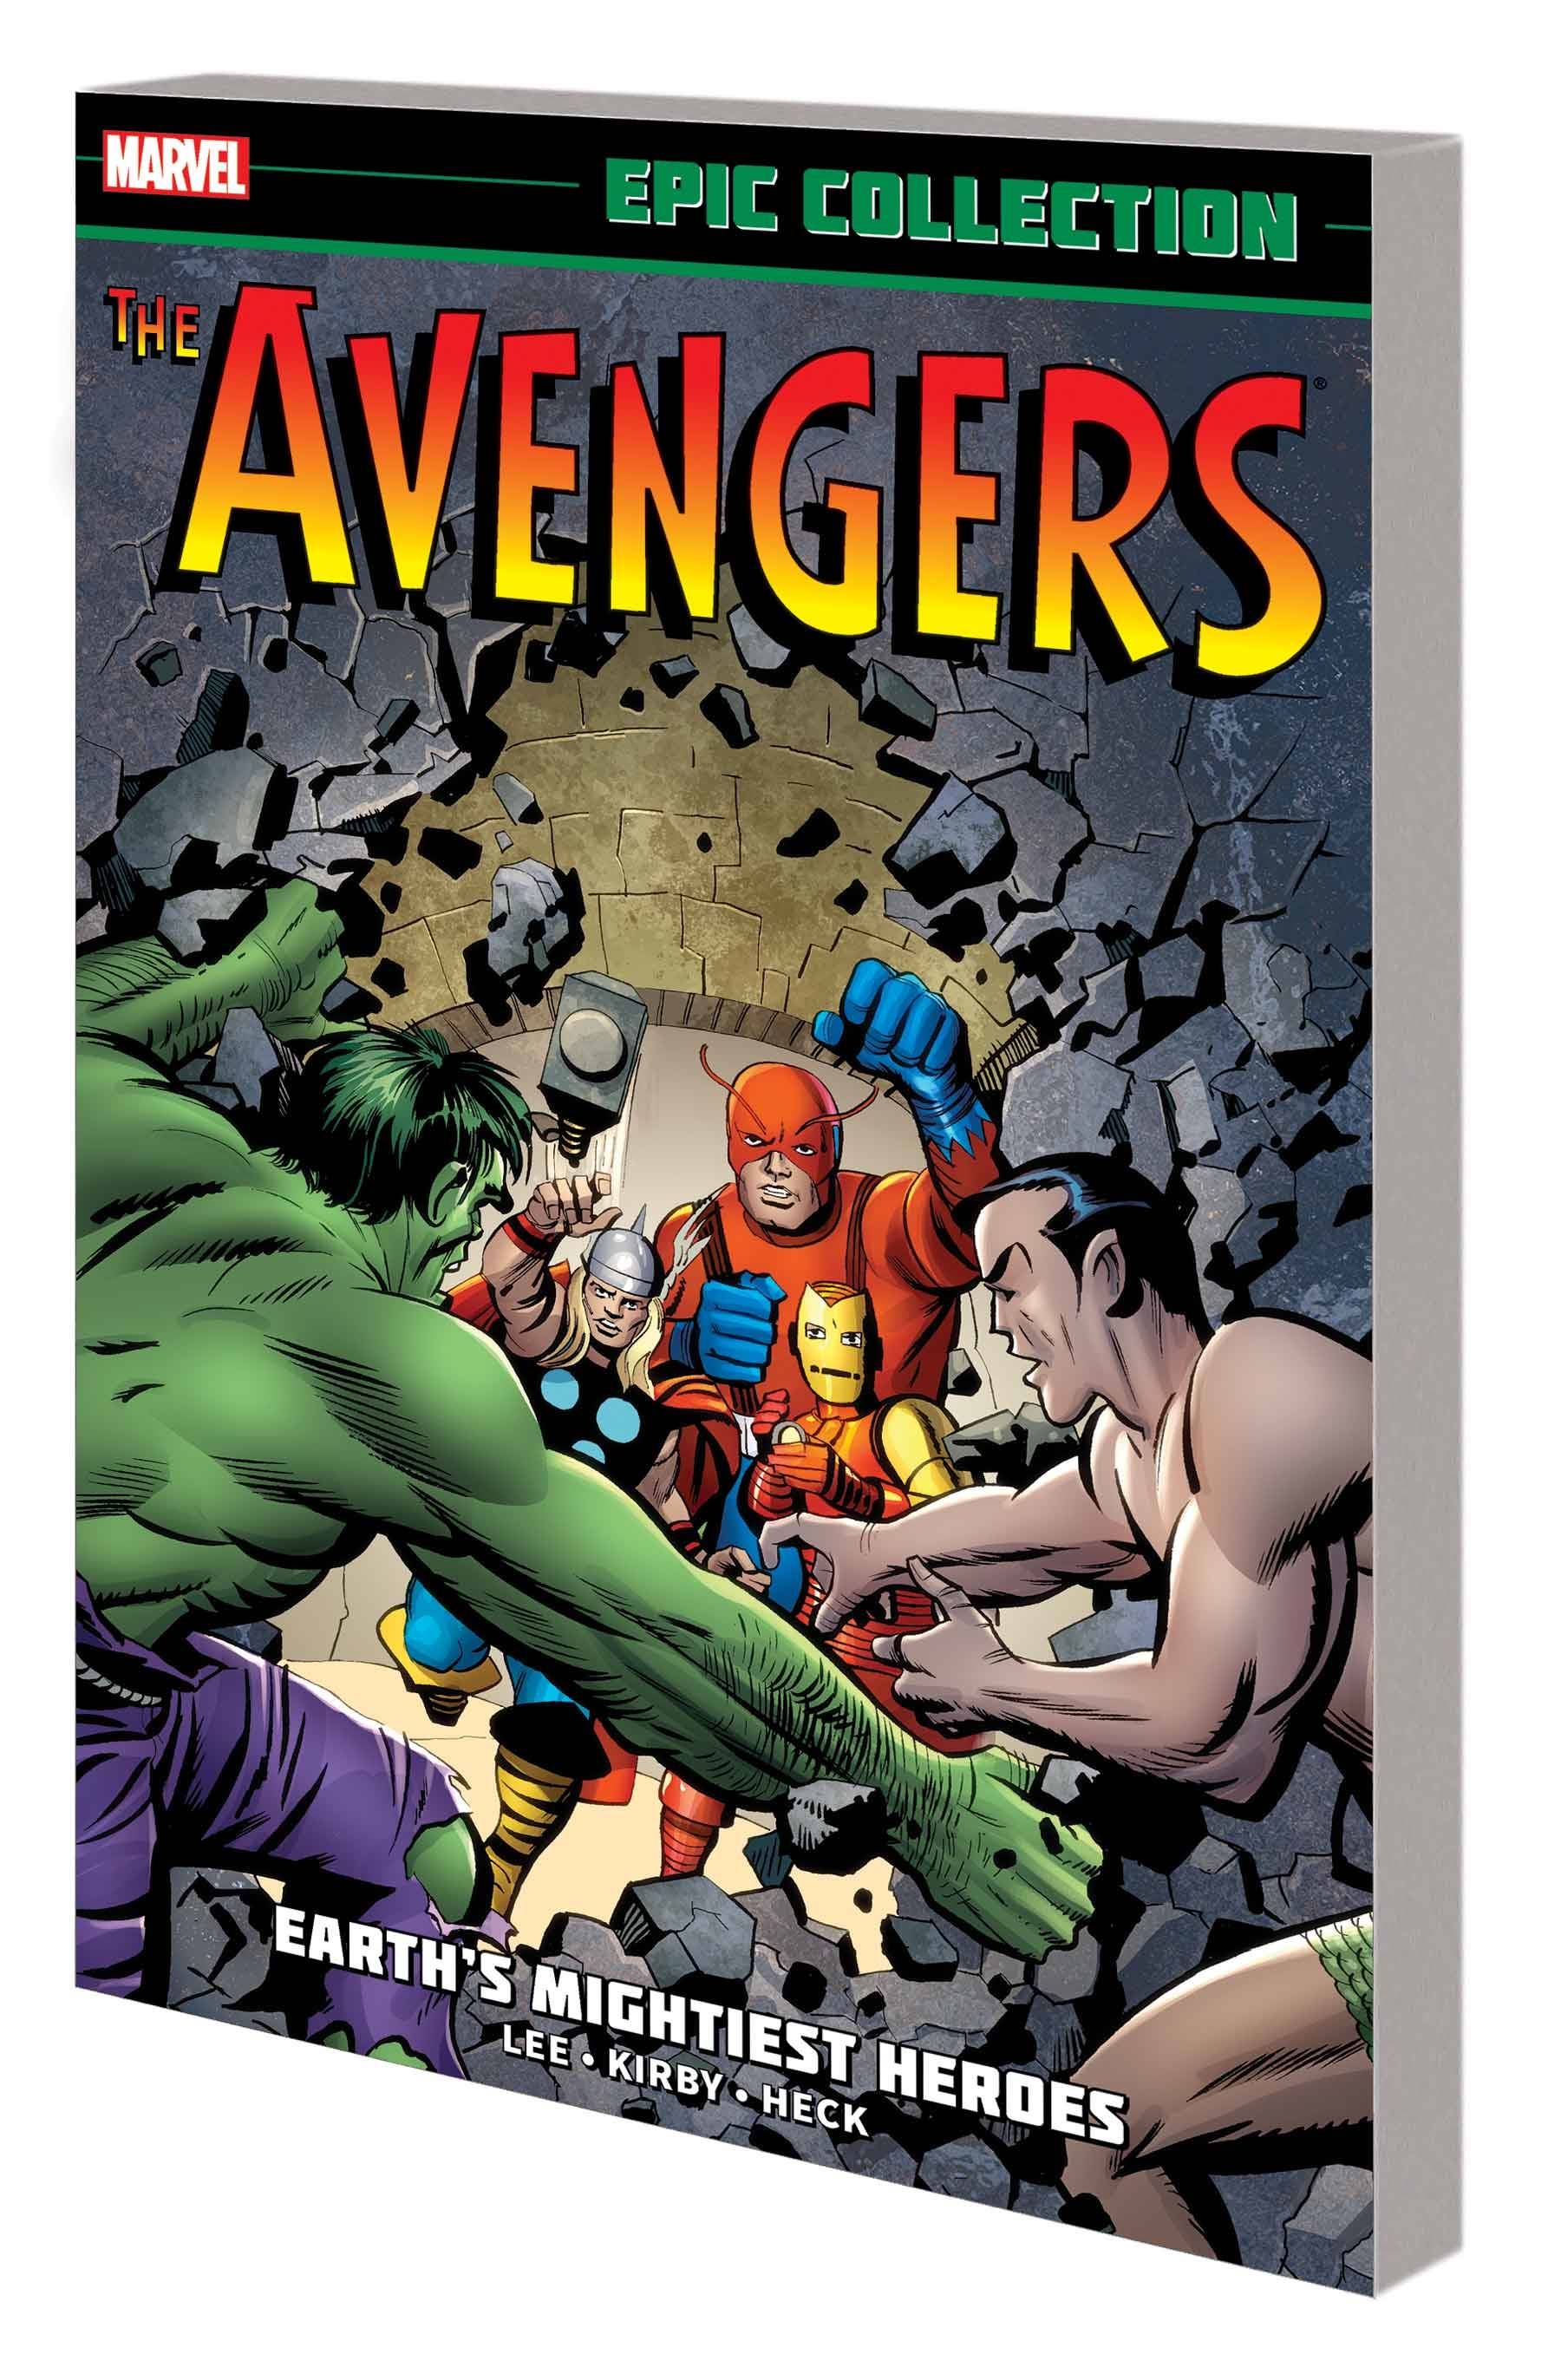 AVENGERS EPIC COLLECTION TP 01 EARTHS MIGHTIEST HEROES